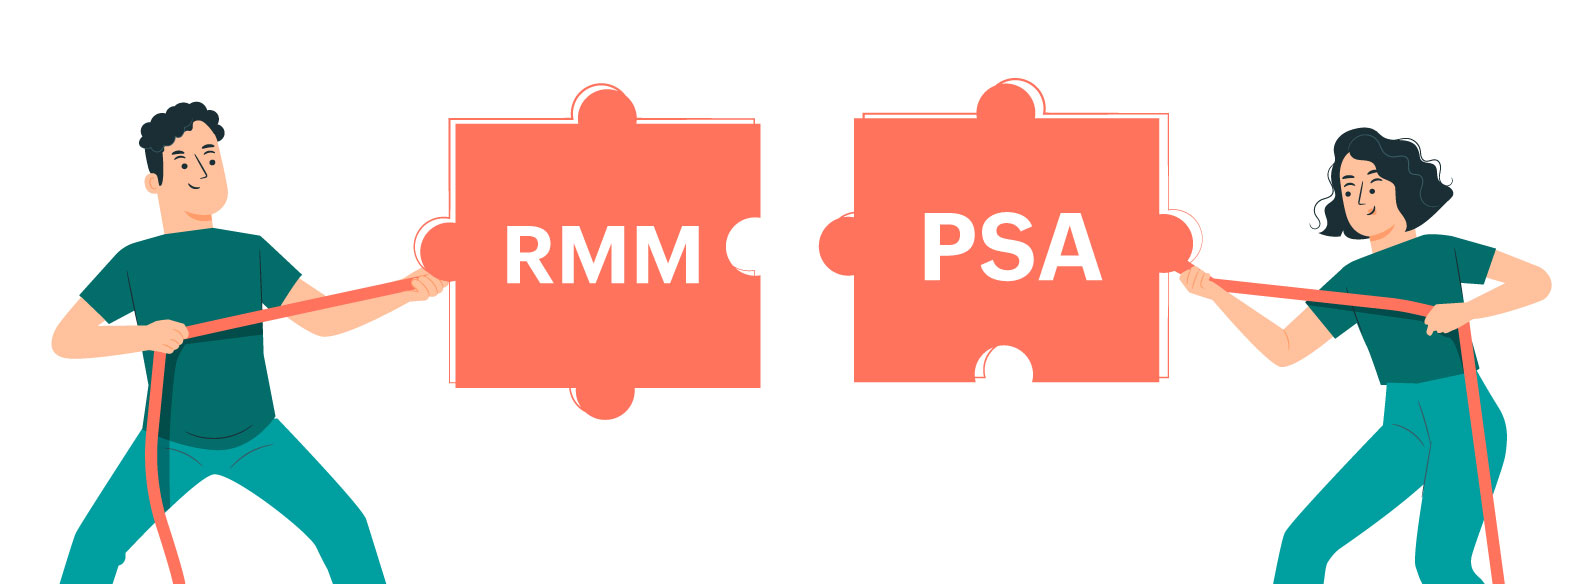 PSA and RMM Tools - ManageEngine RMM Central